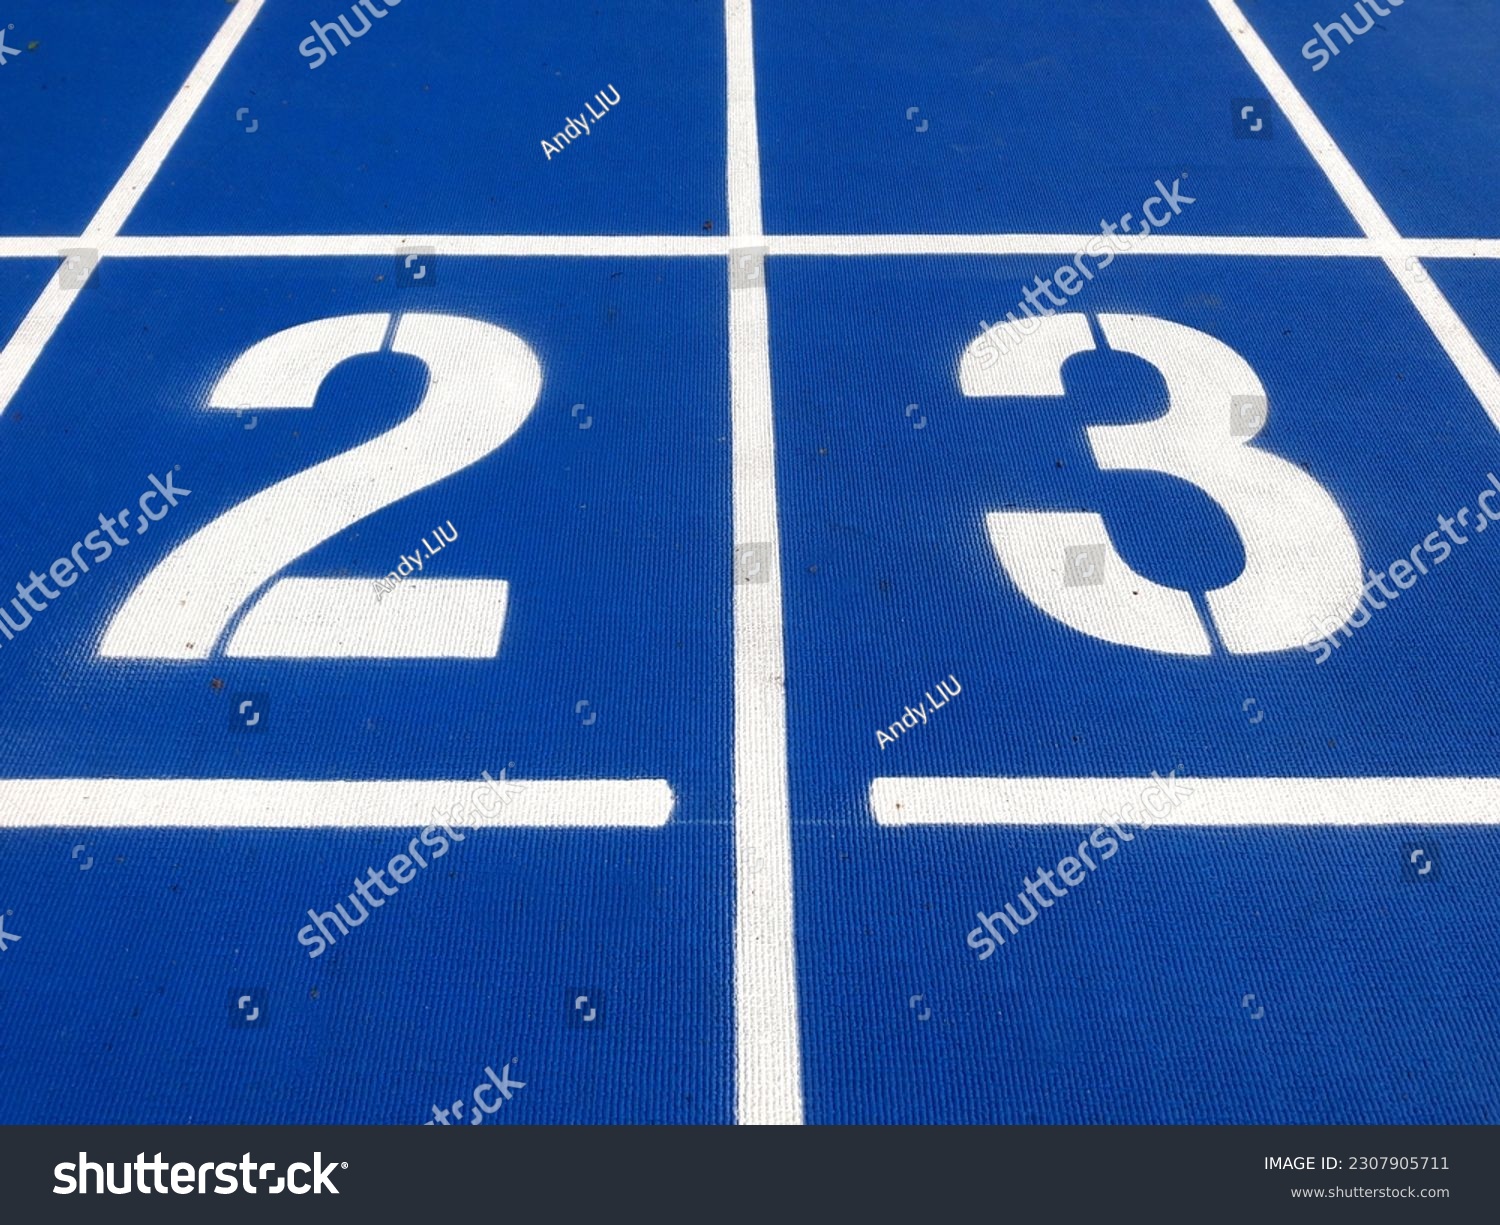 Stadium runway or athlete's track start number (2) (3). Tracks are rubber man-made tracks used in athletics. #2307905711